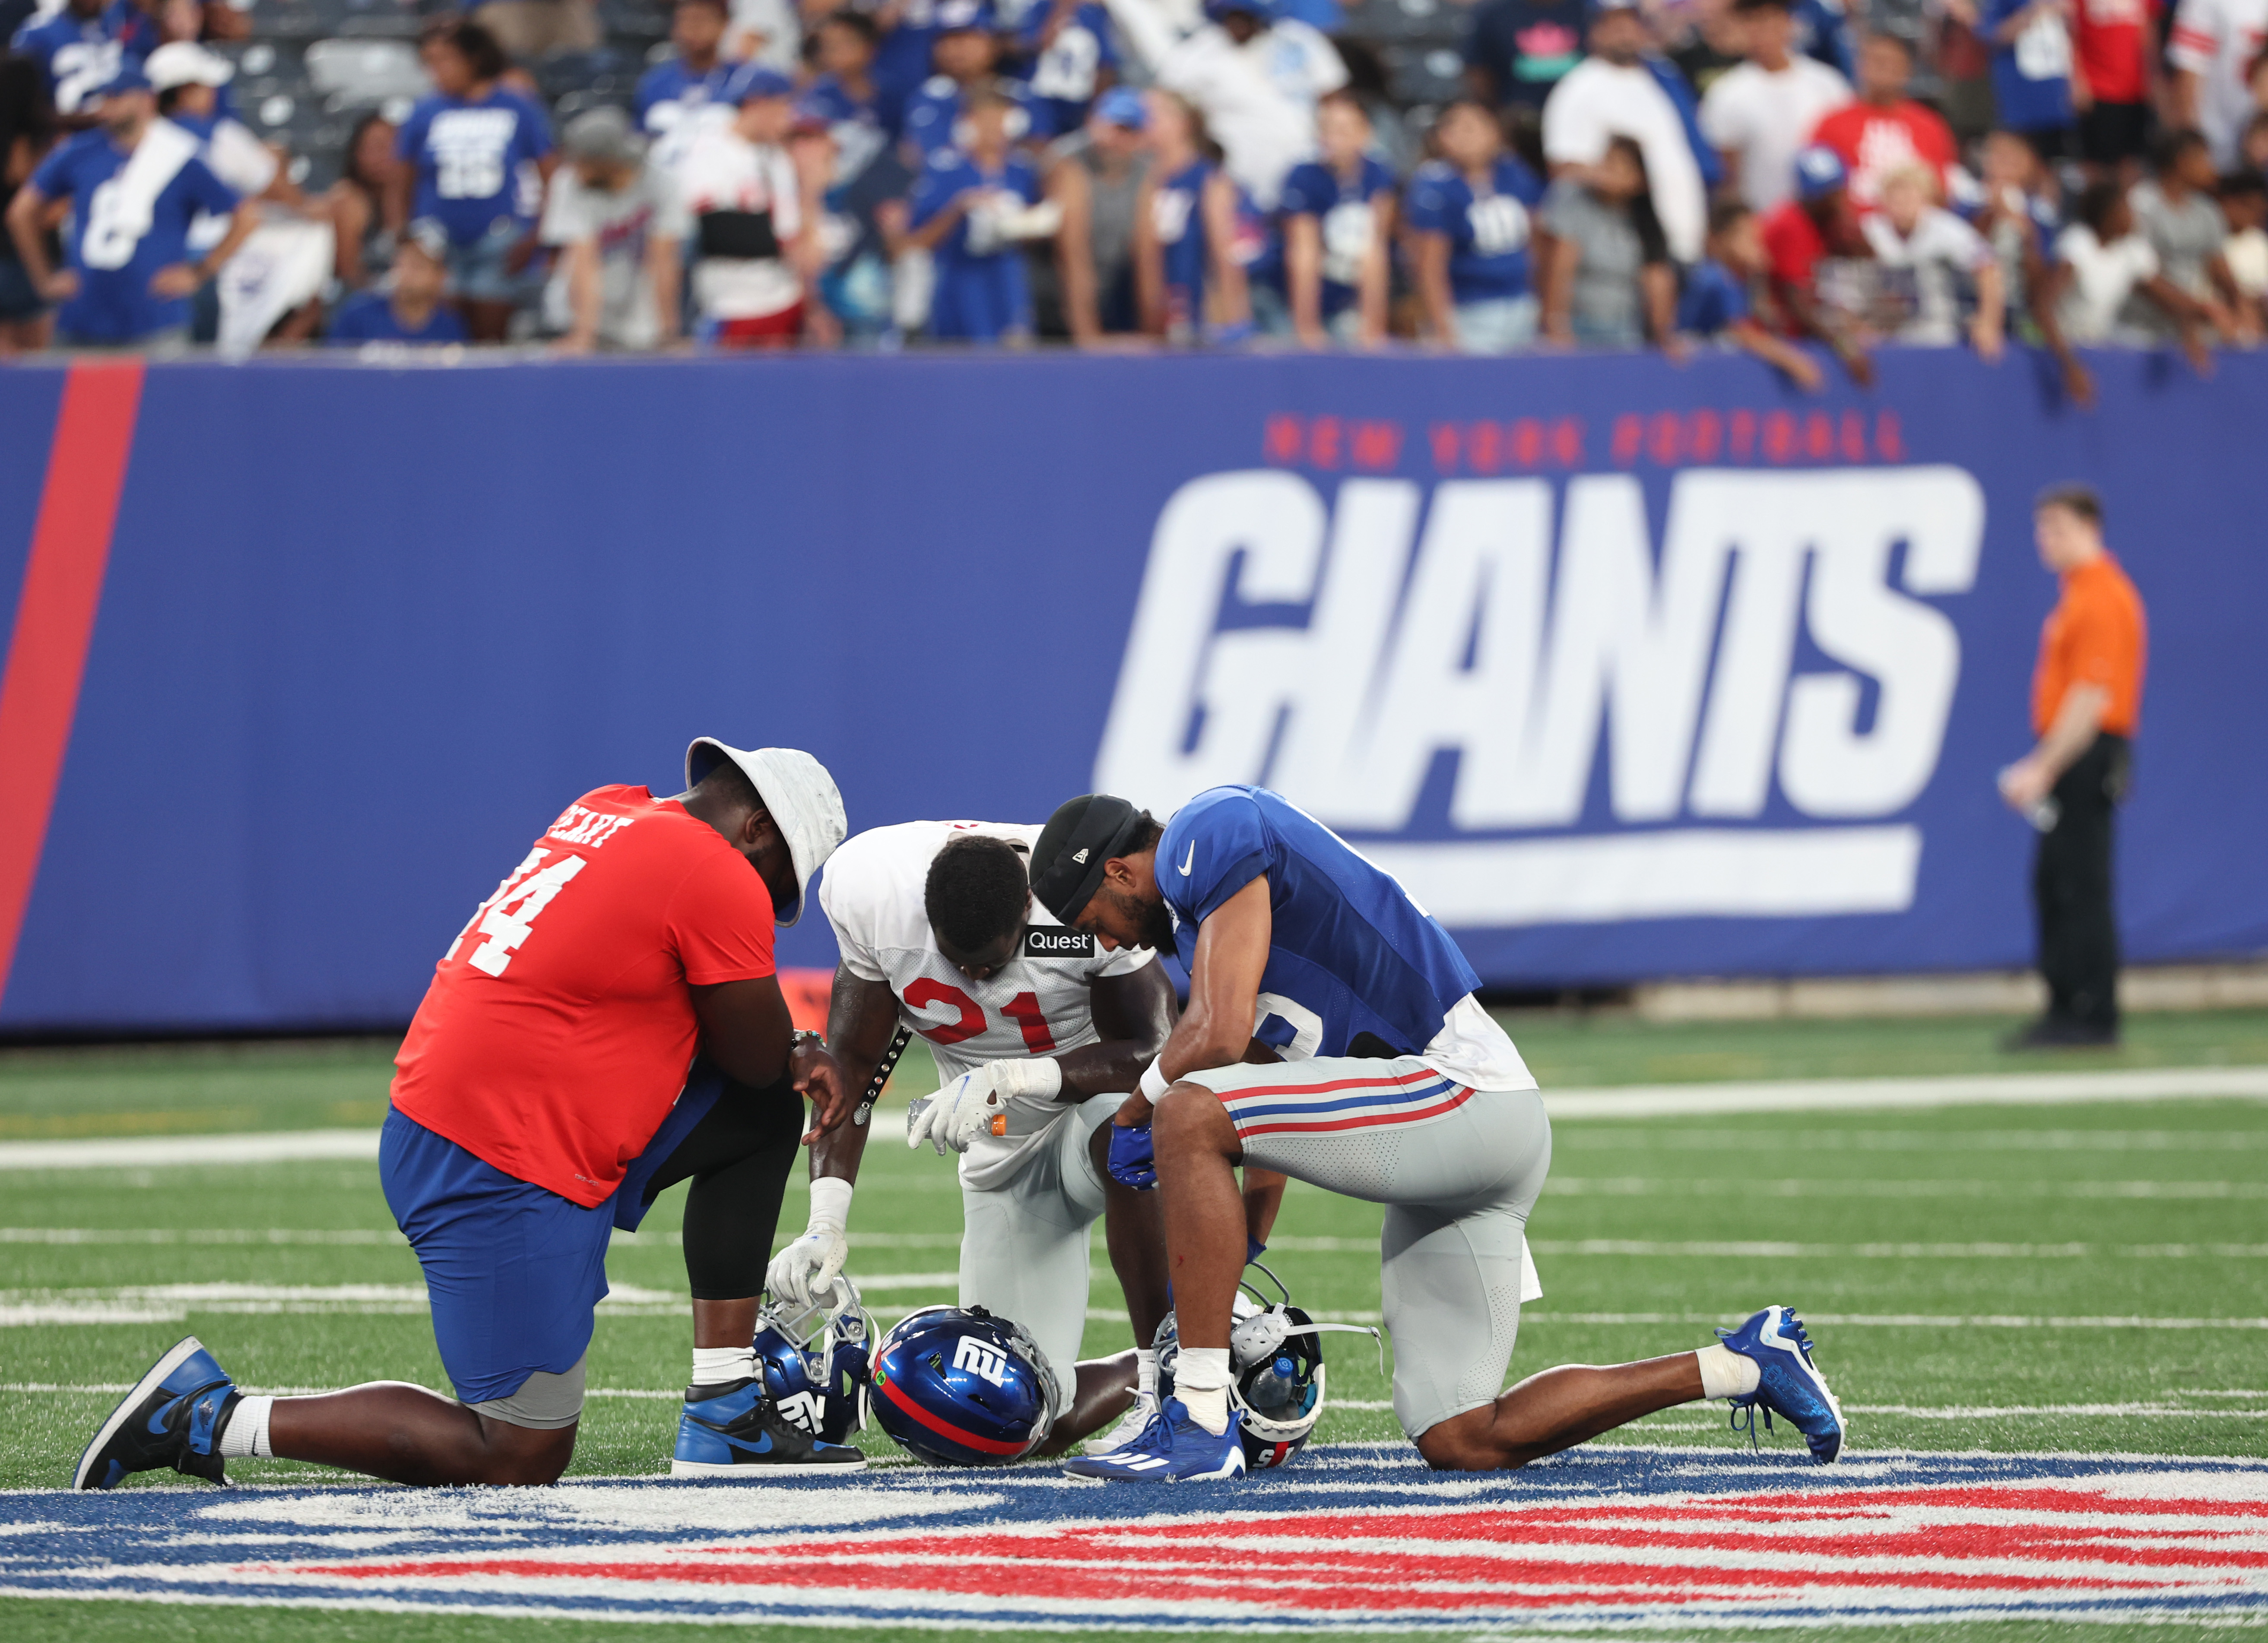 New York Giants play Blue & White scrimmage at Fan Fest 2022 